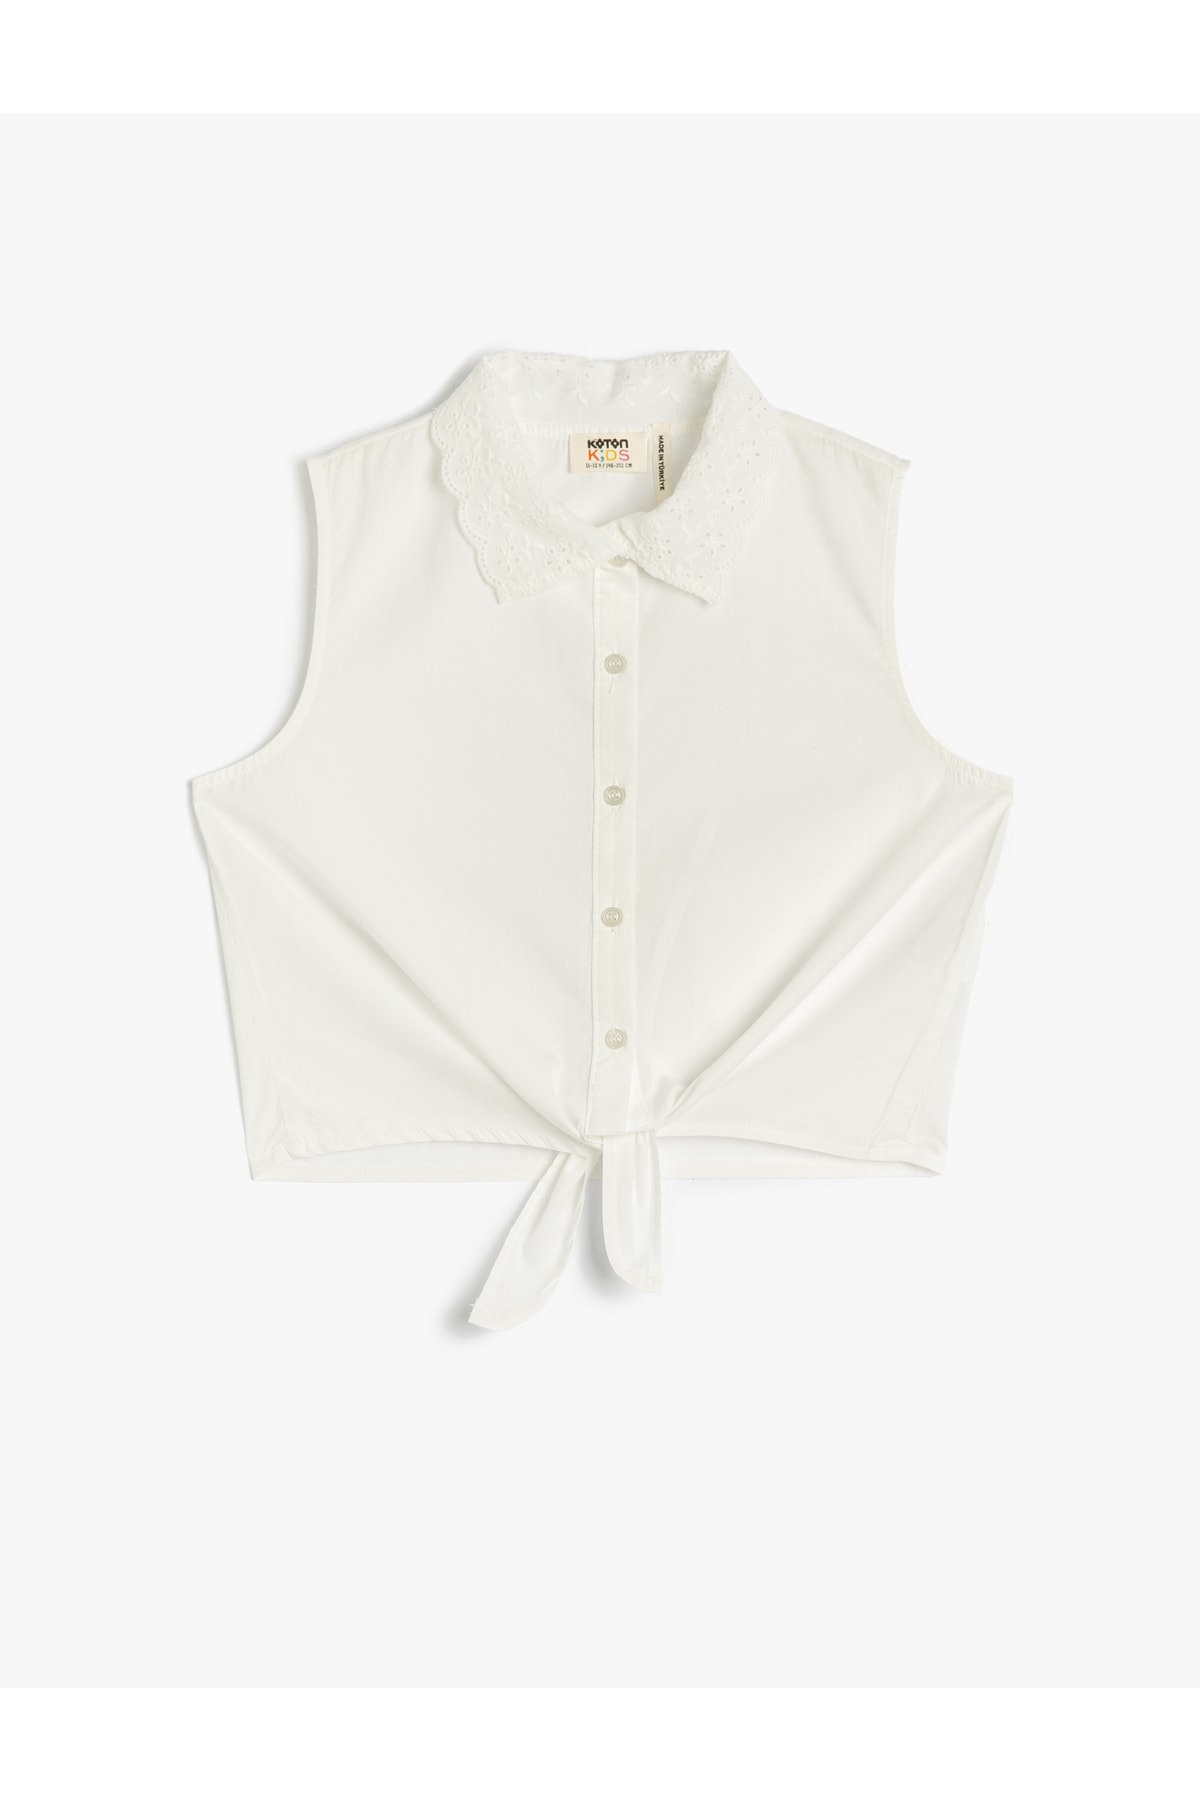 Koton Crop Shirt with Front Tie Detail, Sleeveless. Embroidered Collar.